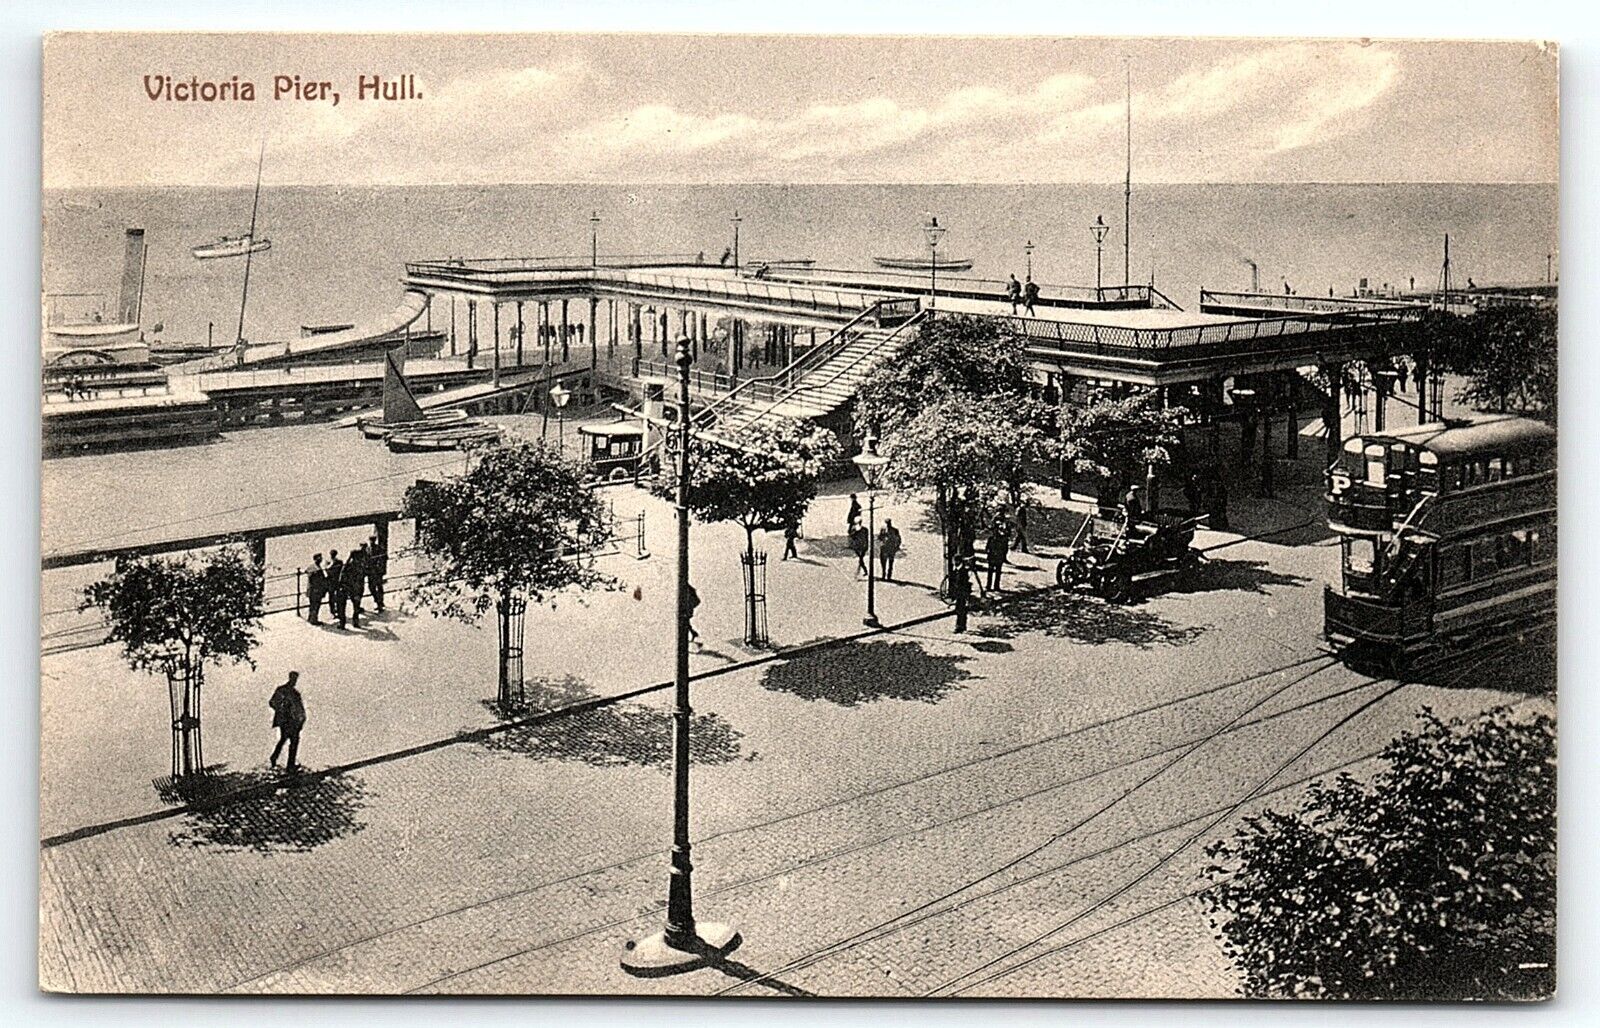 c1910 VICTORIA PIER HULL TROLLY EARLY AUTOMOBILE STEAMSHIP POSTCARD P732